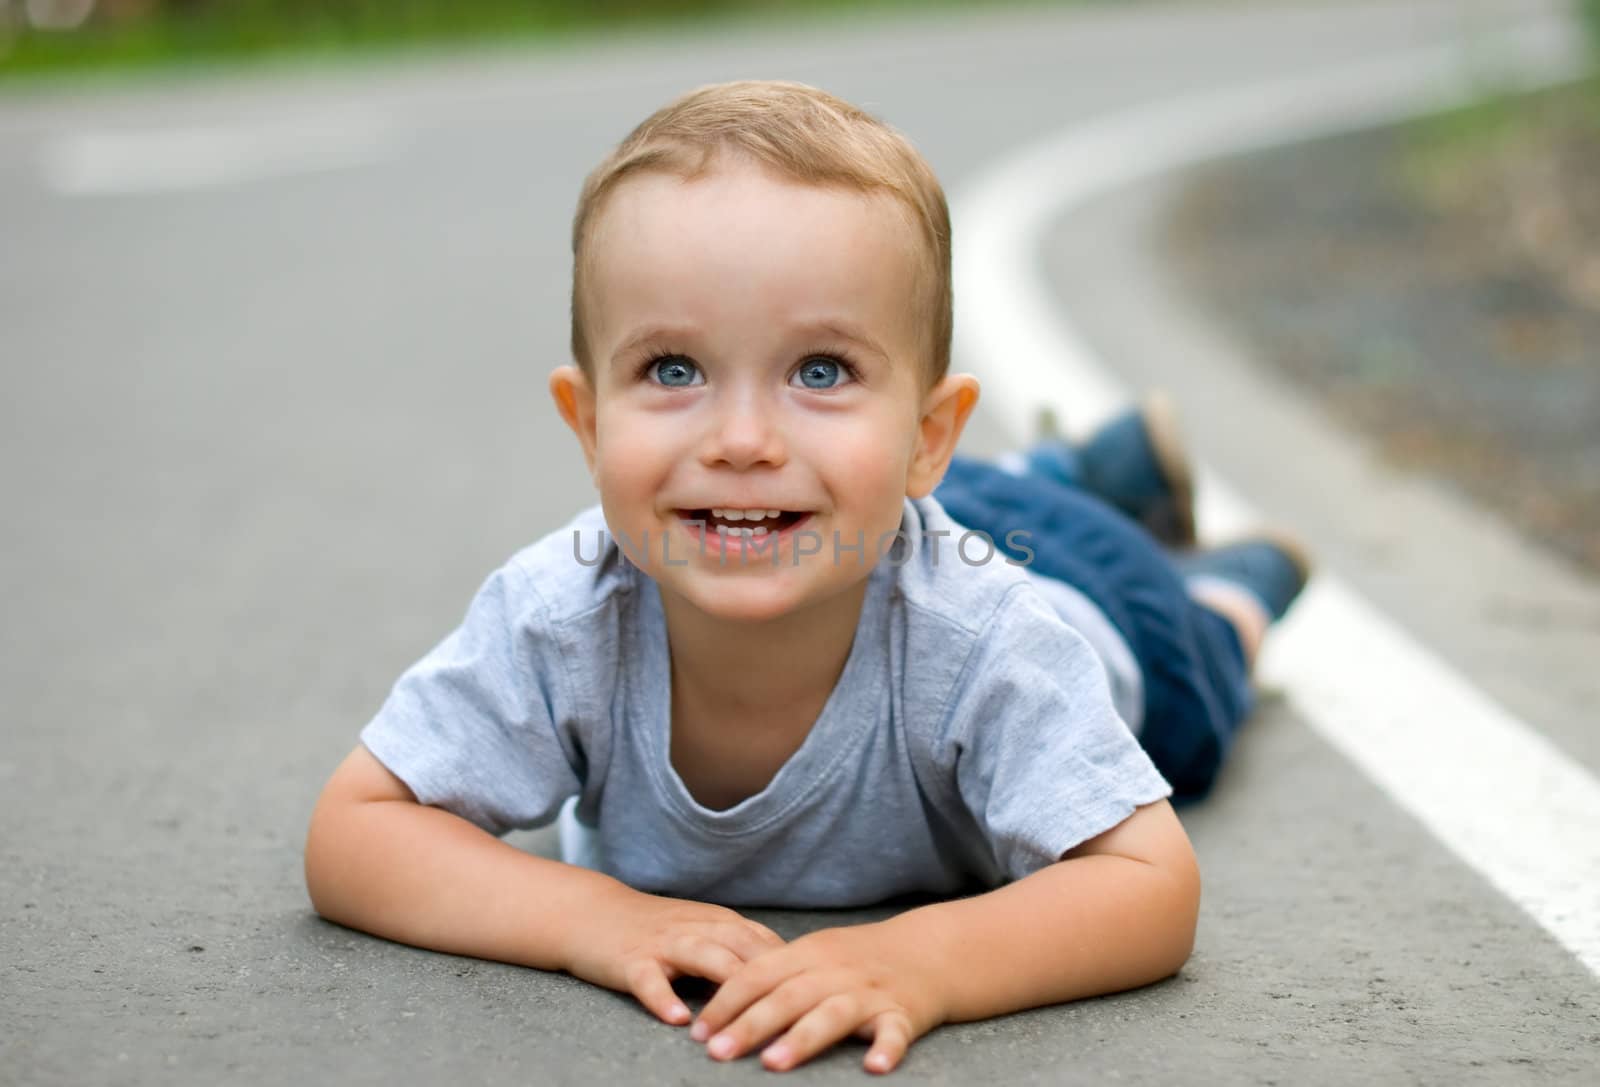 Happy child lying on the pavement